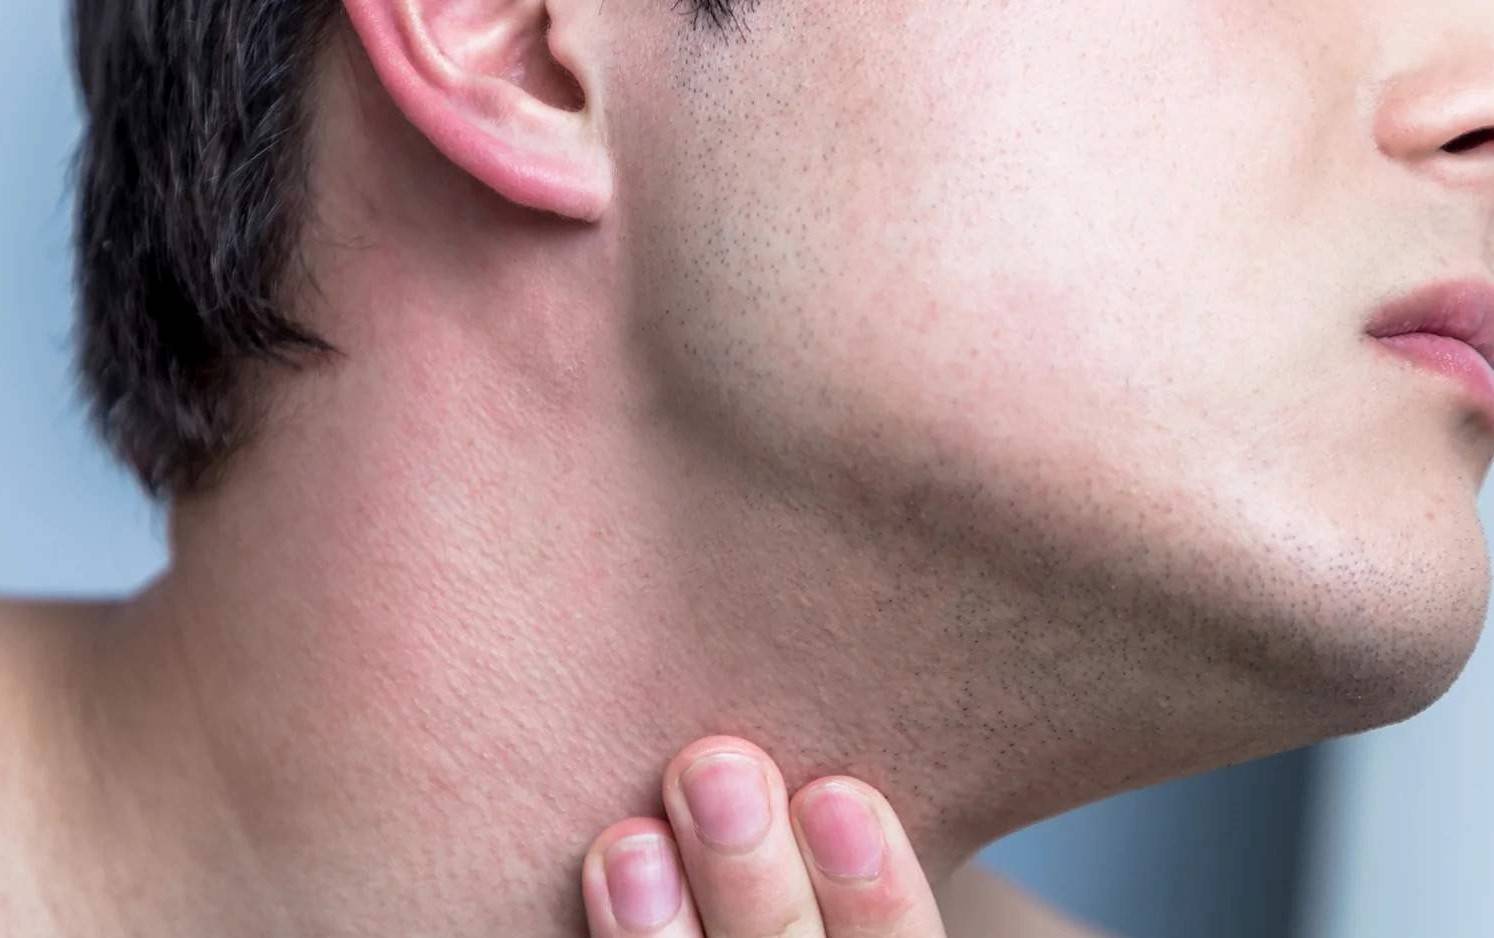 A man with razor burn on his neck